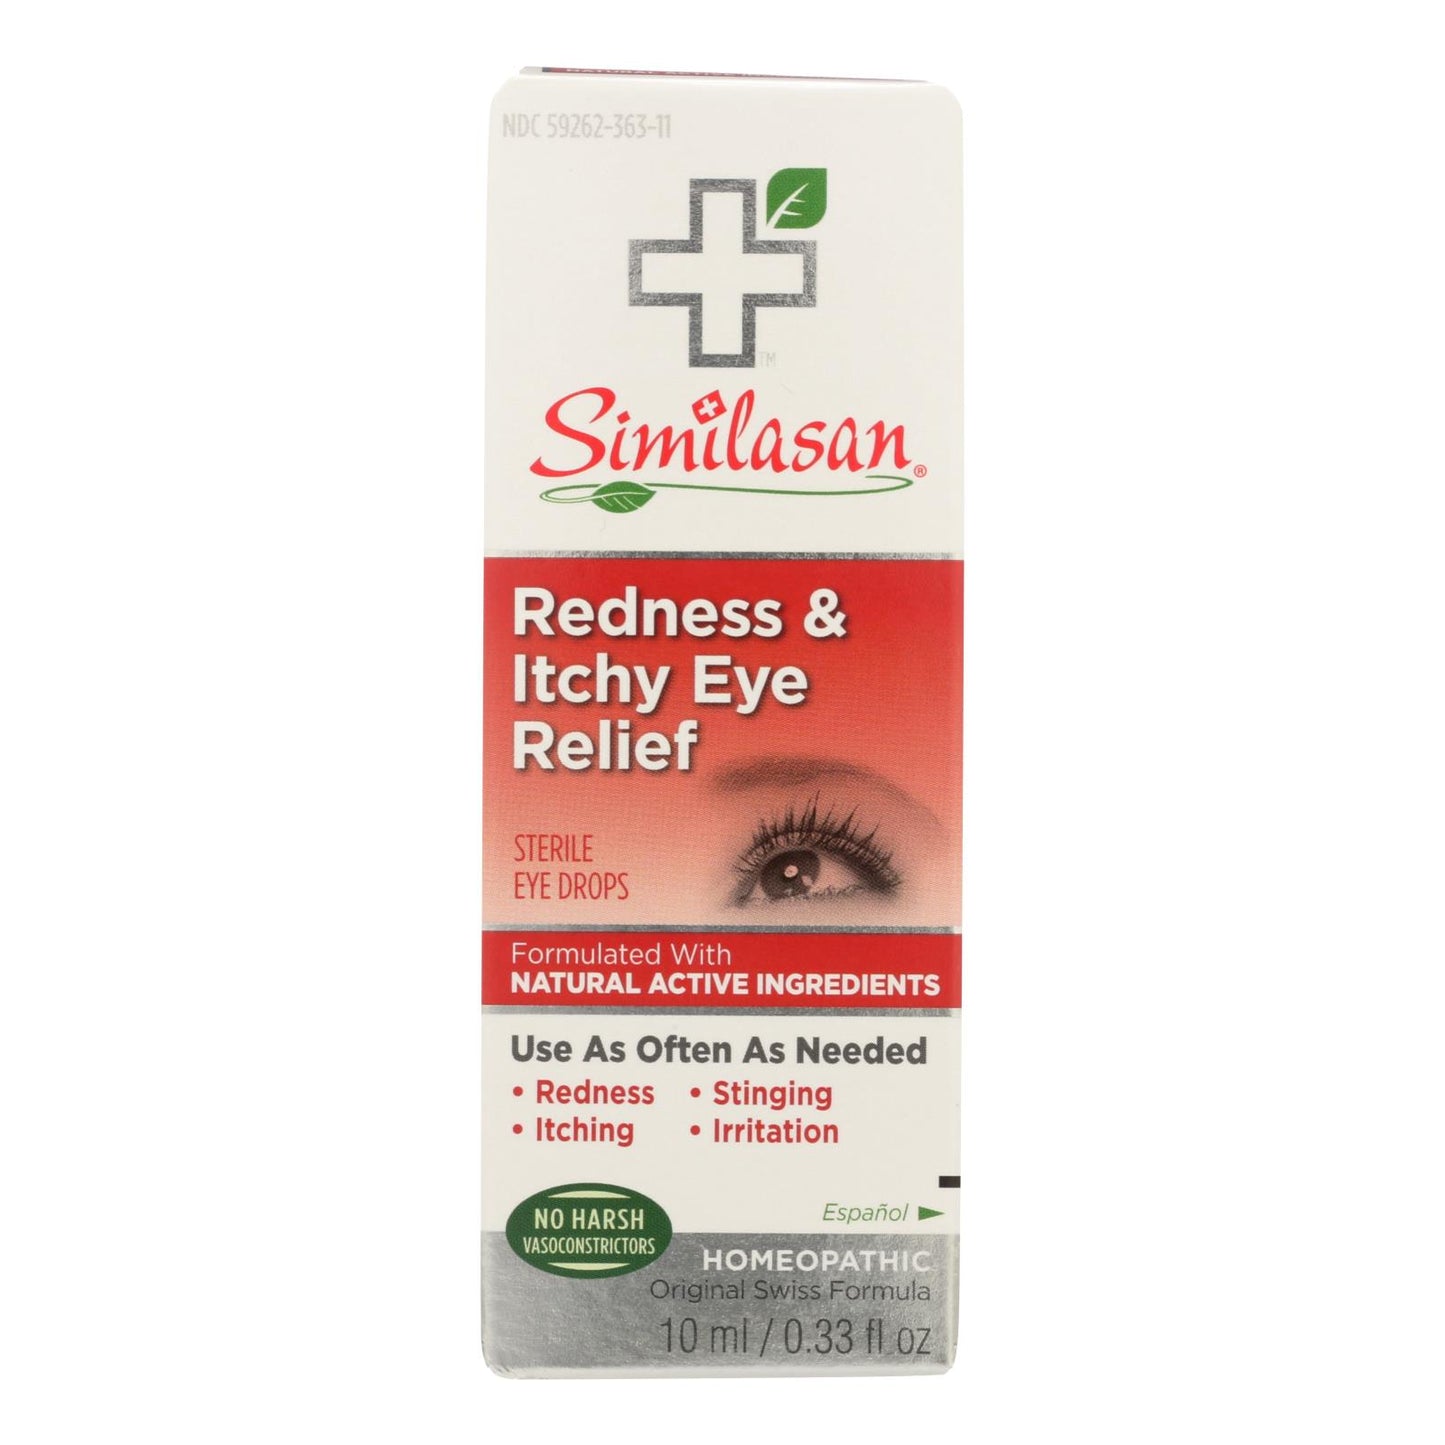 Similasan Redness And Itchy Homeopathic Eye Relief Drops, 0.33 fl oz